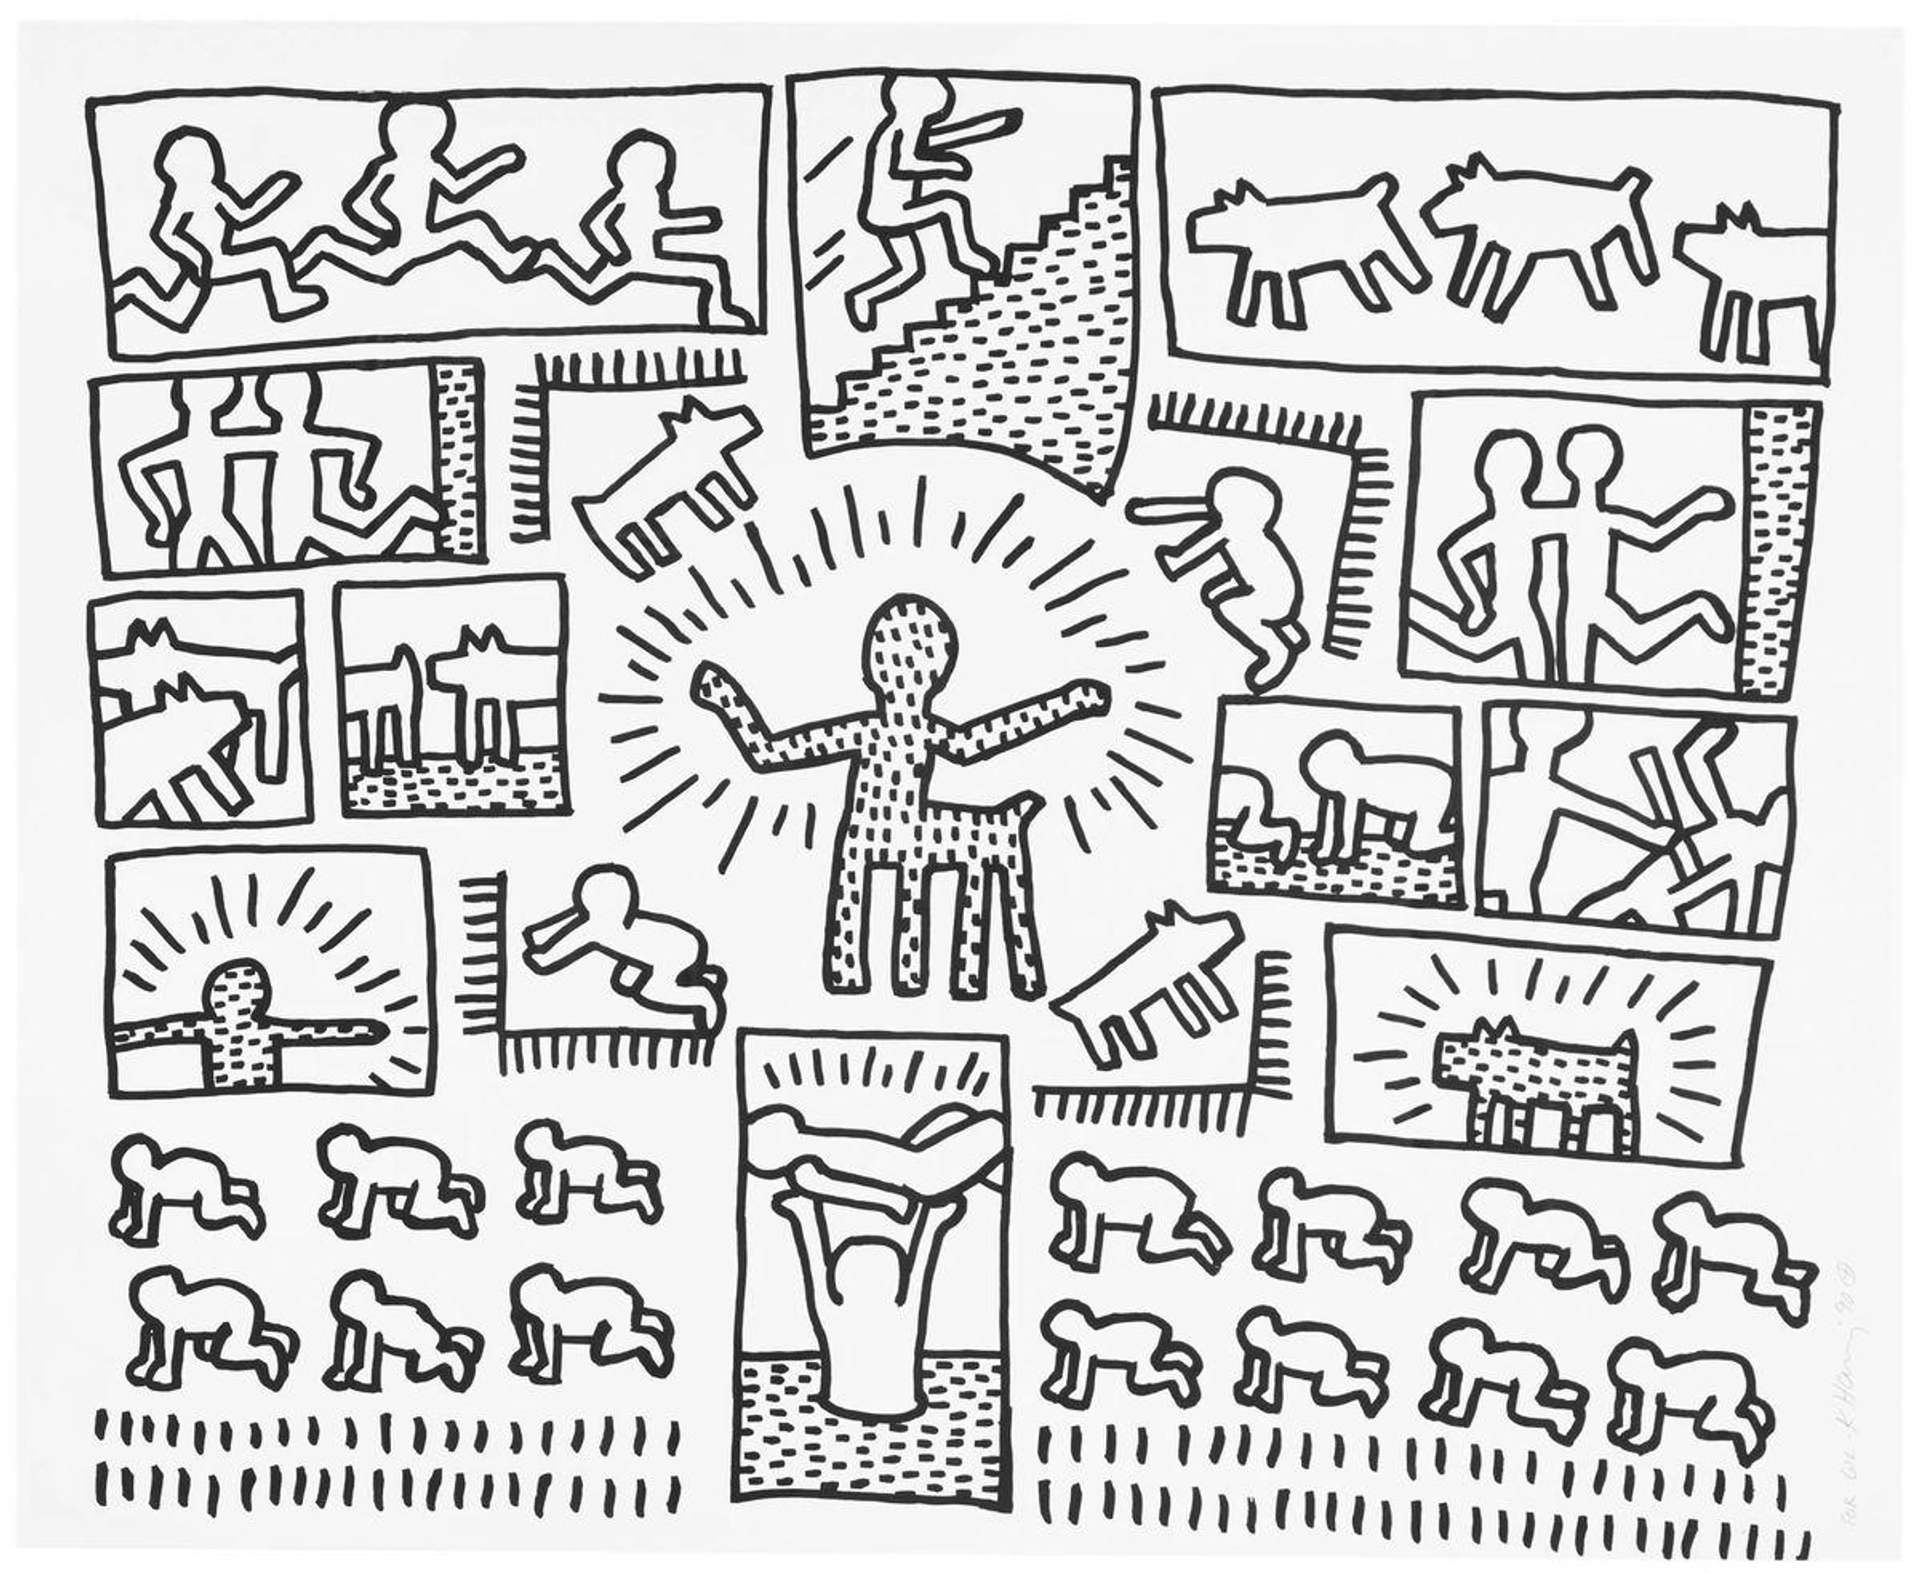 The Blueprint Drawings 10 - Signed Print by Keith Haring 1990 - MyArtBroker